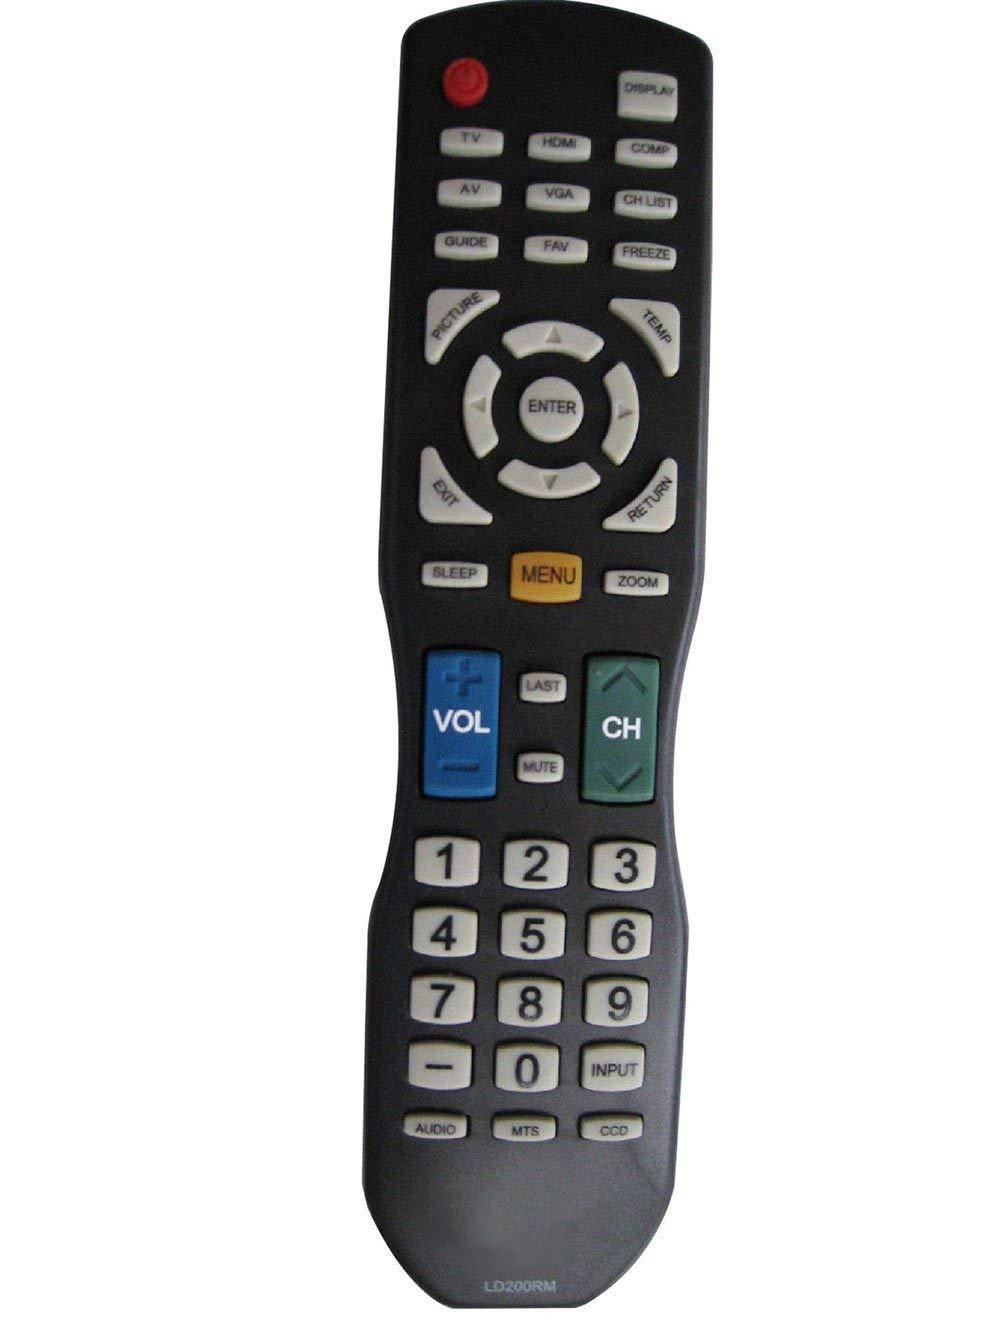 New LD200RM Remote Control sub LD220RM LD4088RM fit for Apex LED LCD TV JE3708 LD3288 LD4688 LD4688T LE40H88 LE4012